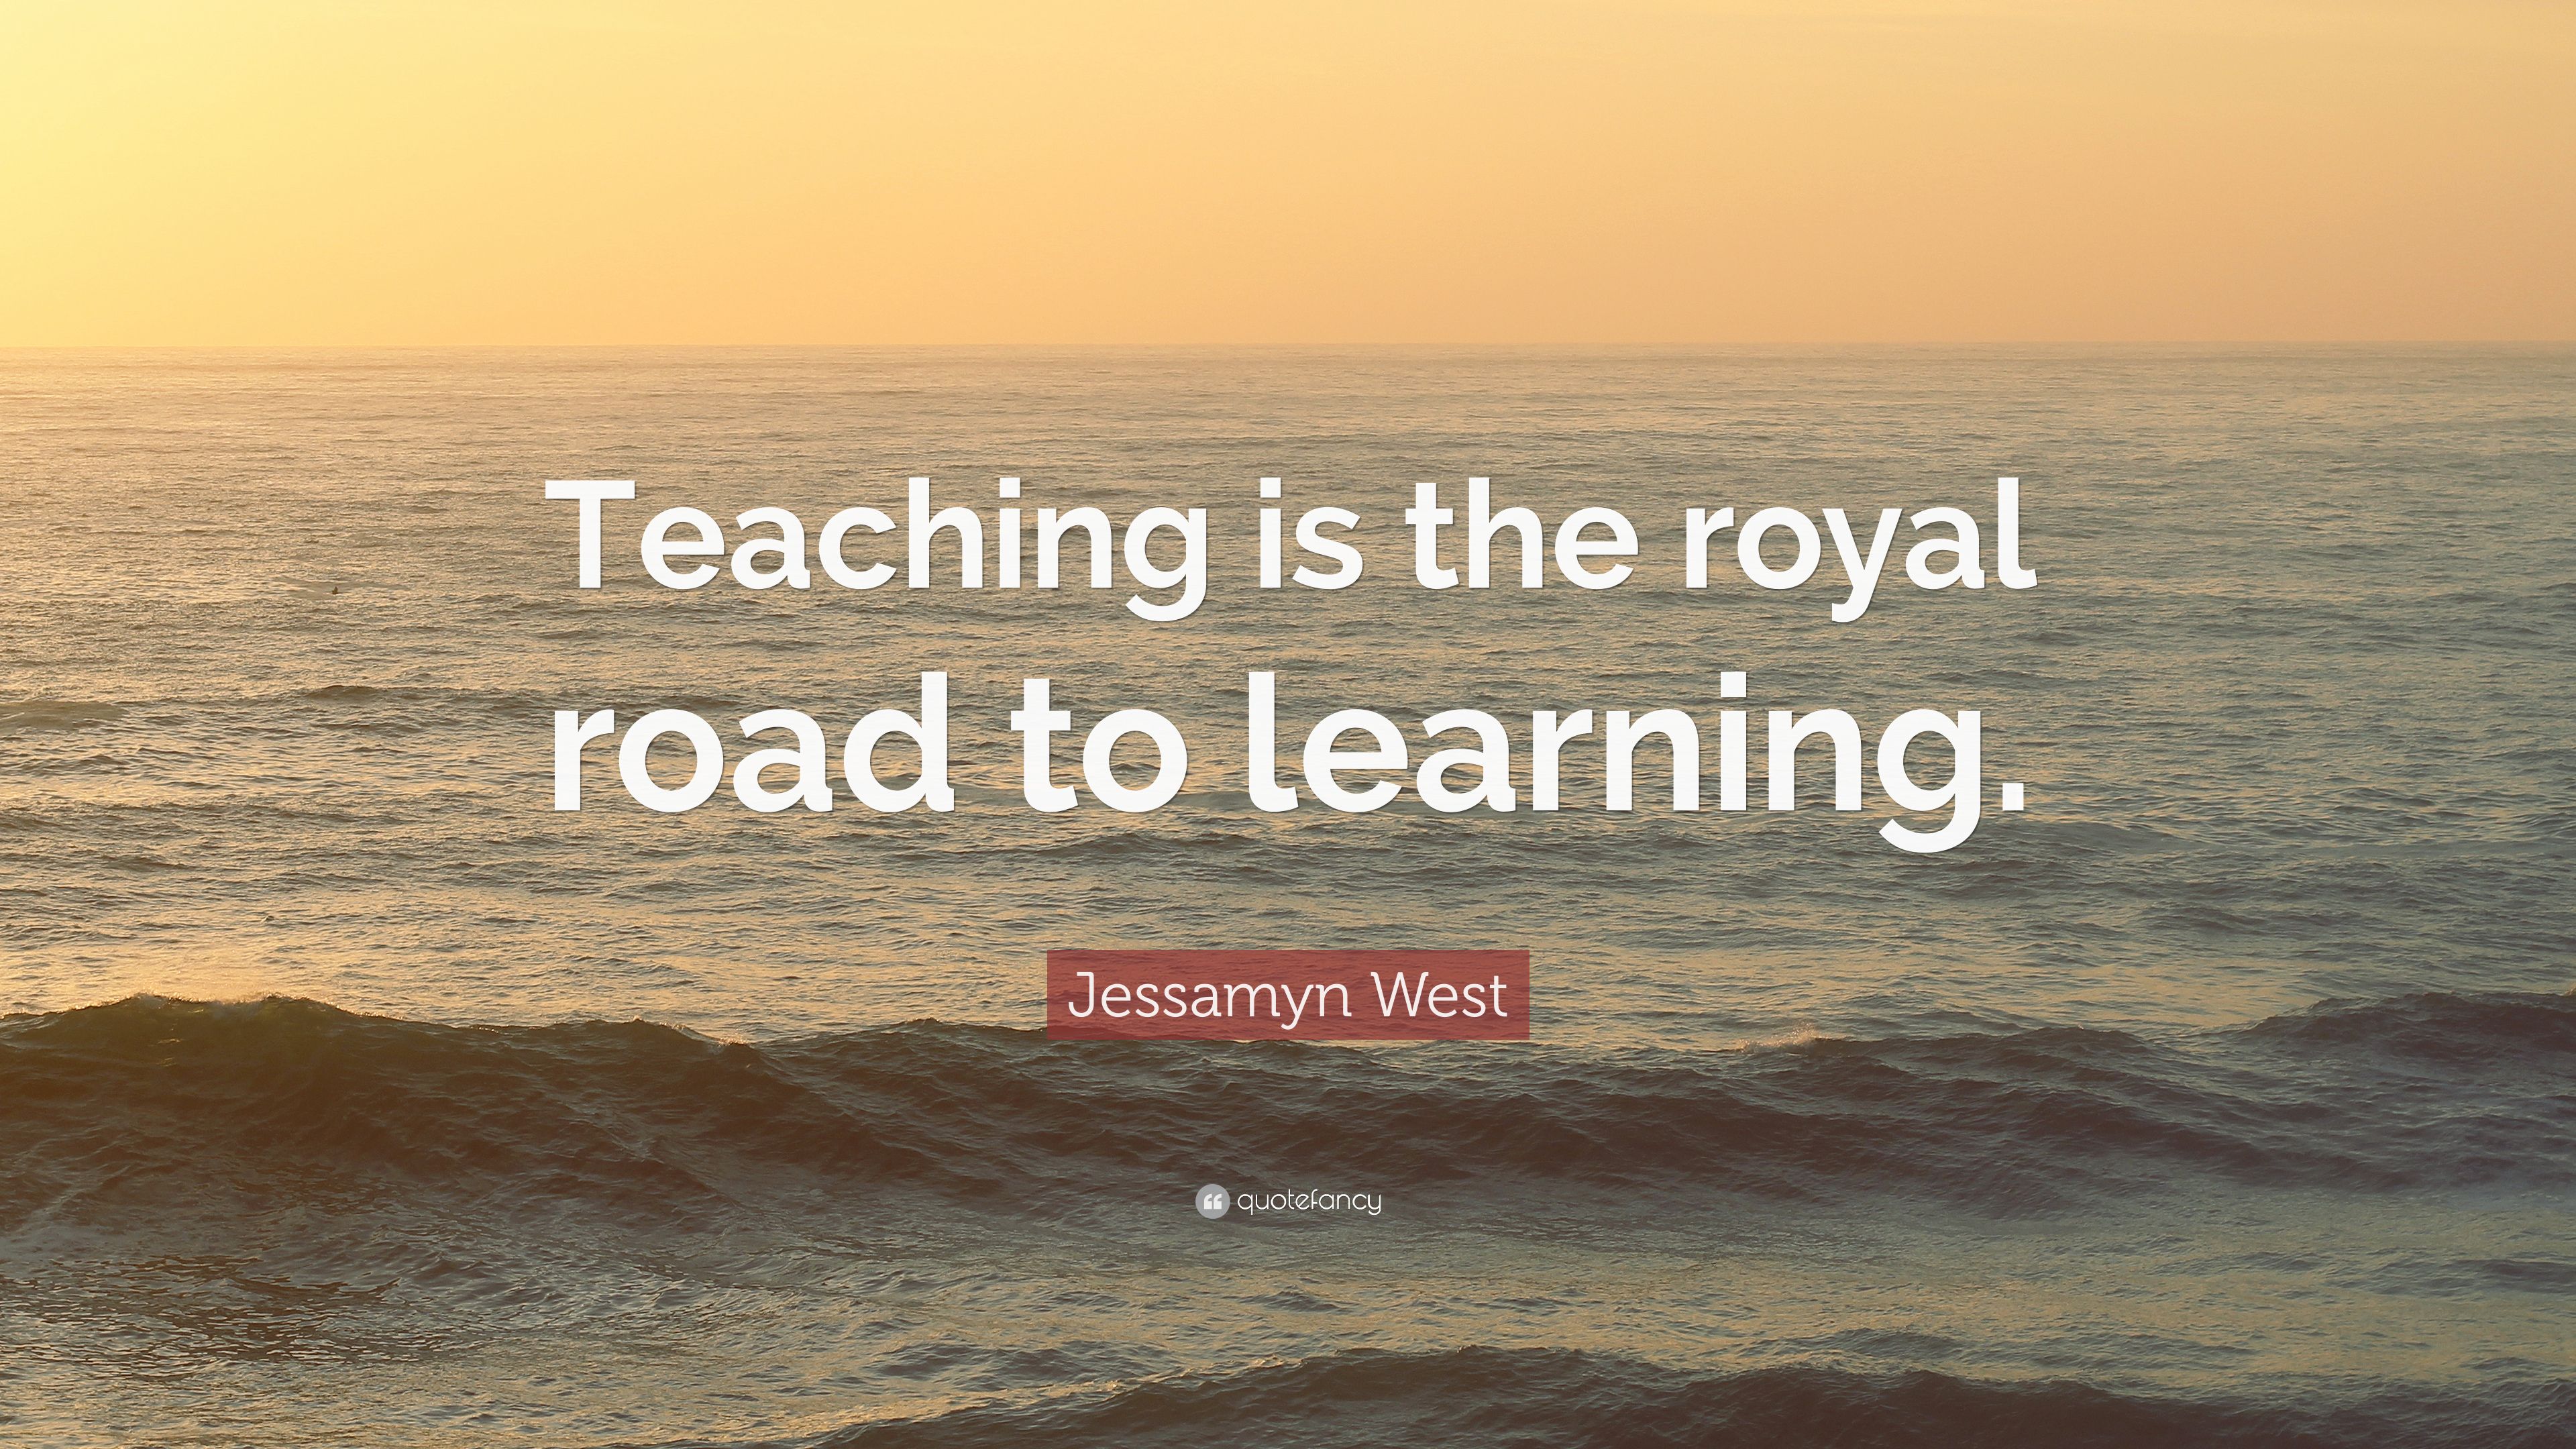 Jessamyn West Quote: “Teaching is the royal road to learning.” 7